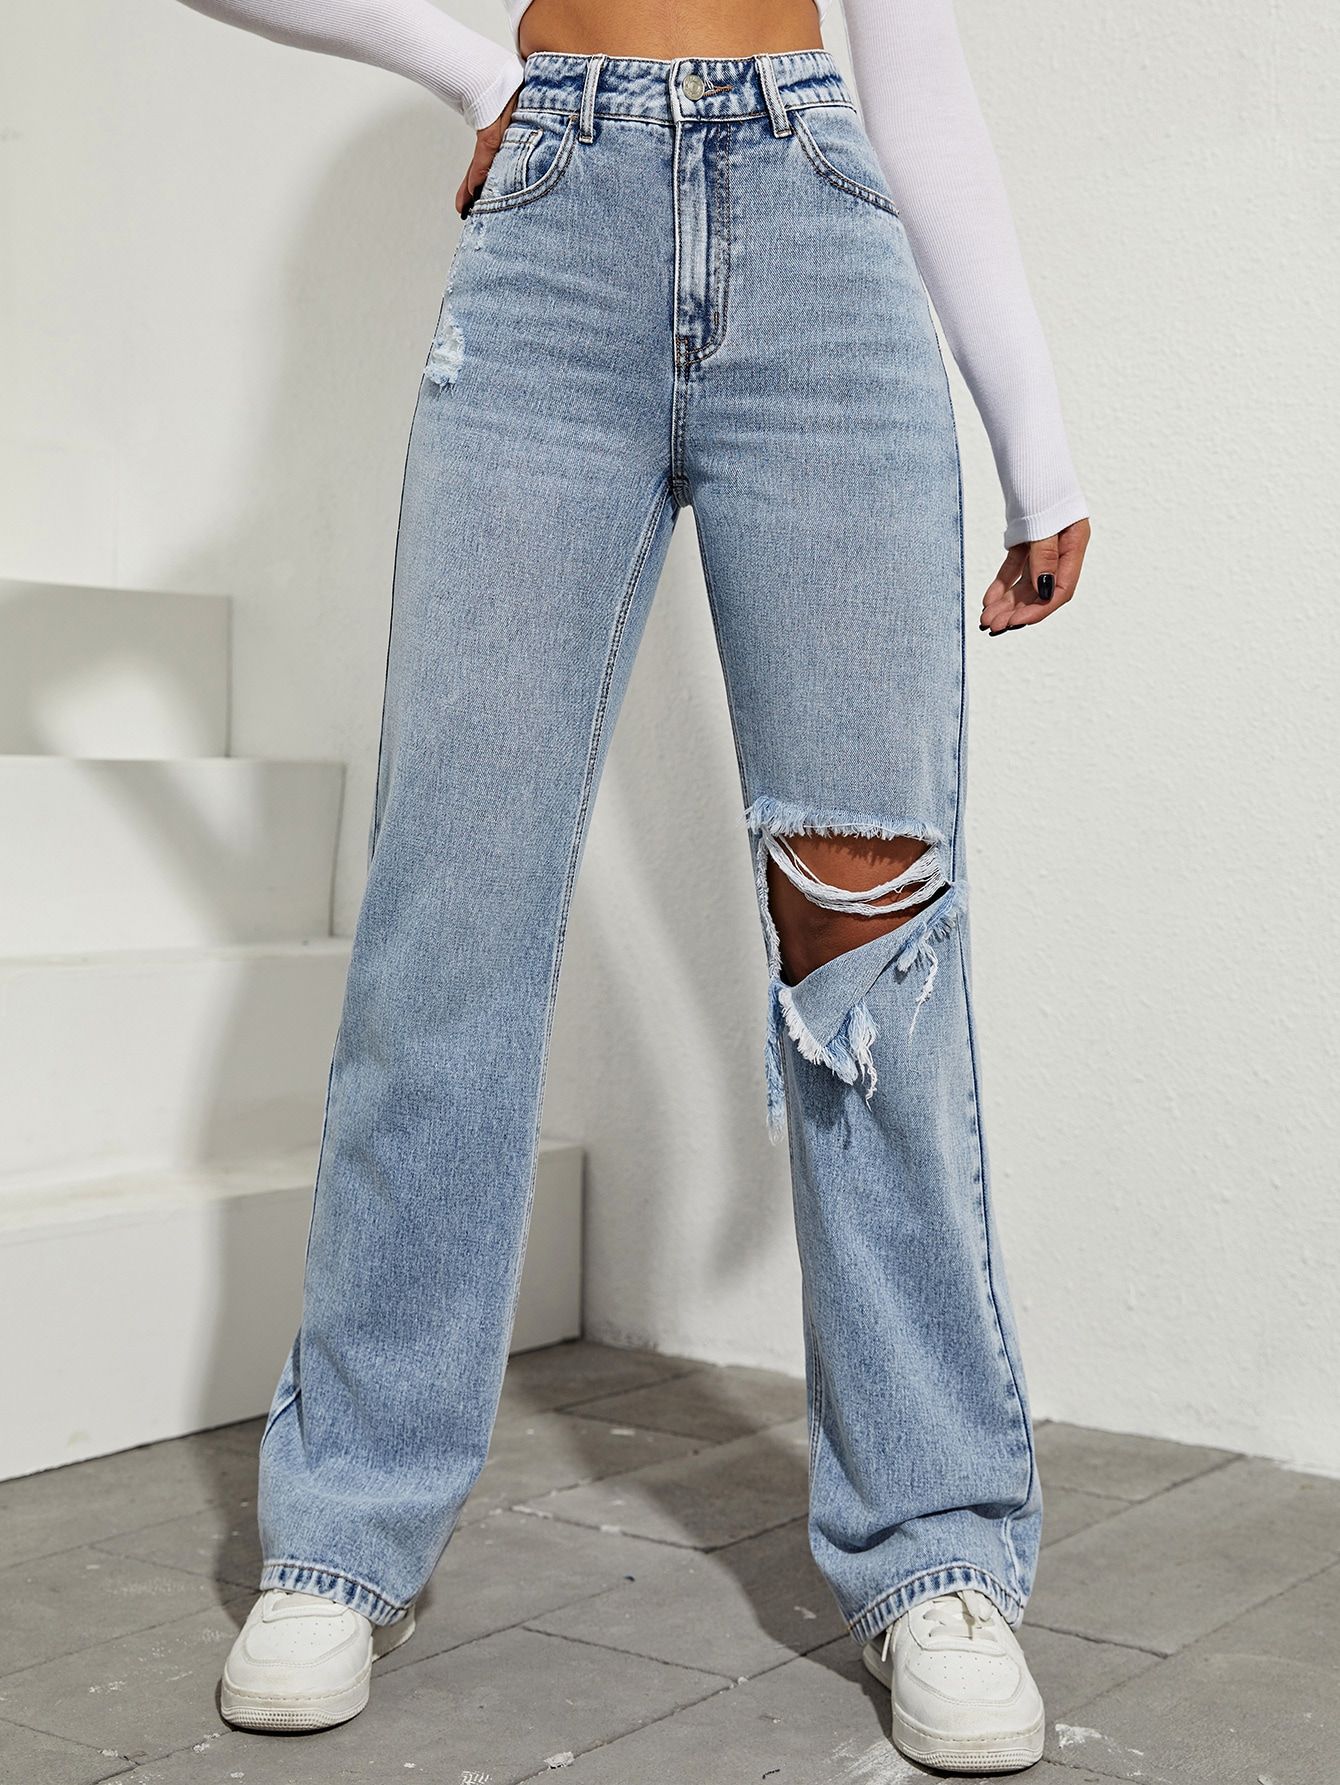 How to Style Baggy Boyfriend Jeans: Best 13 Cool Outfit Ideas for Women